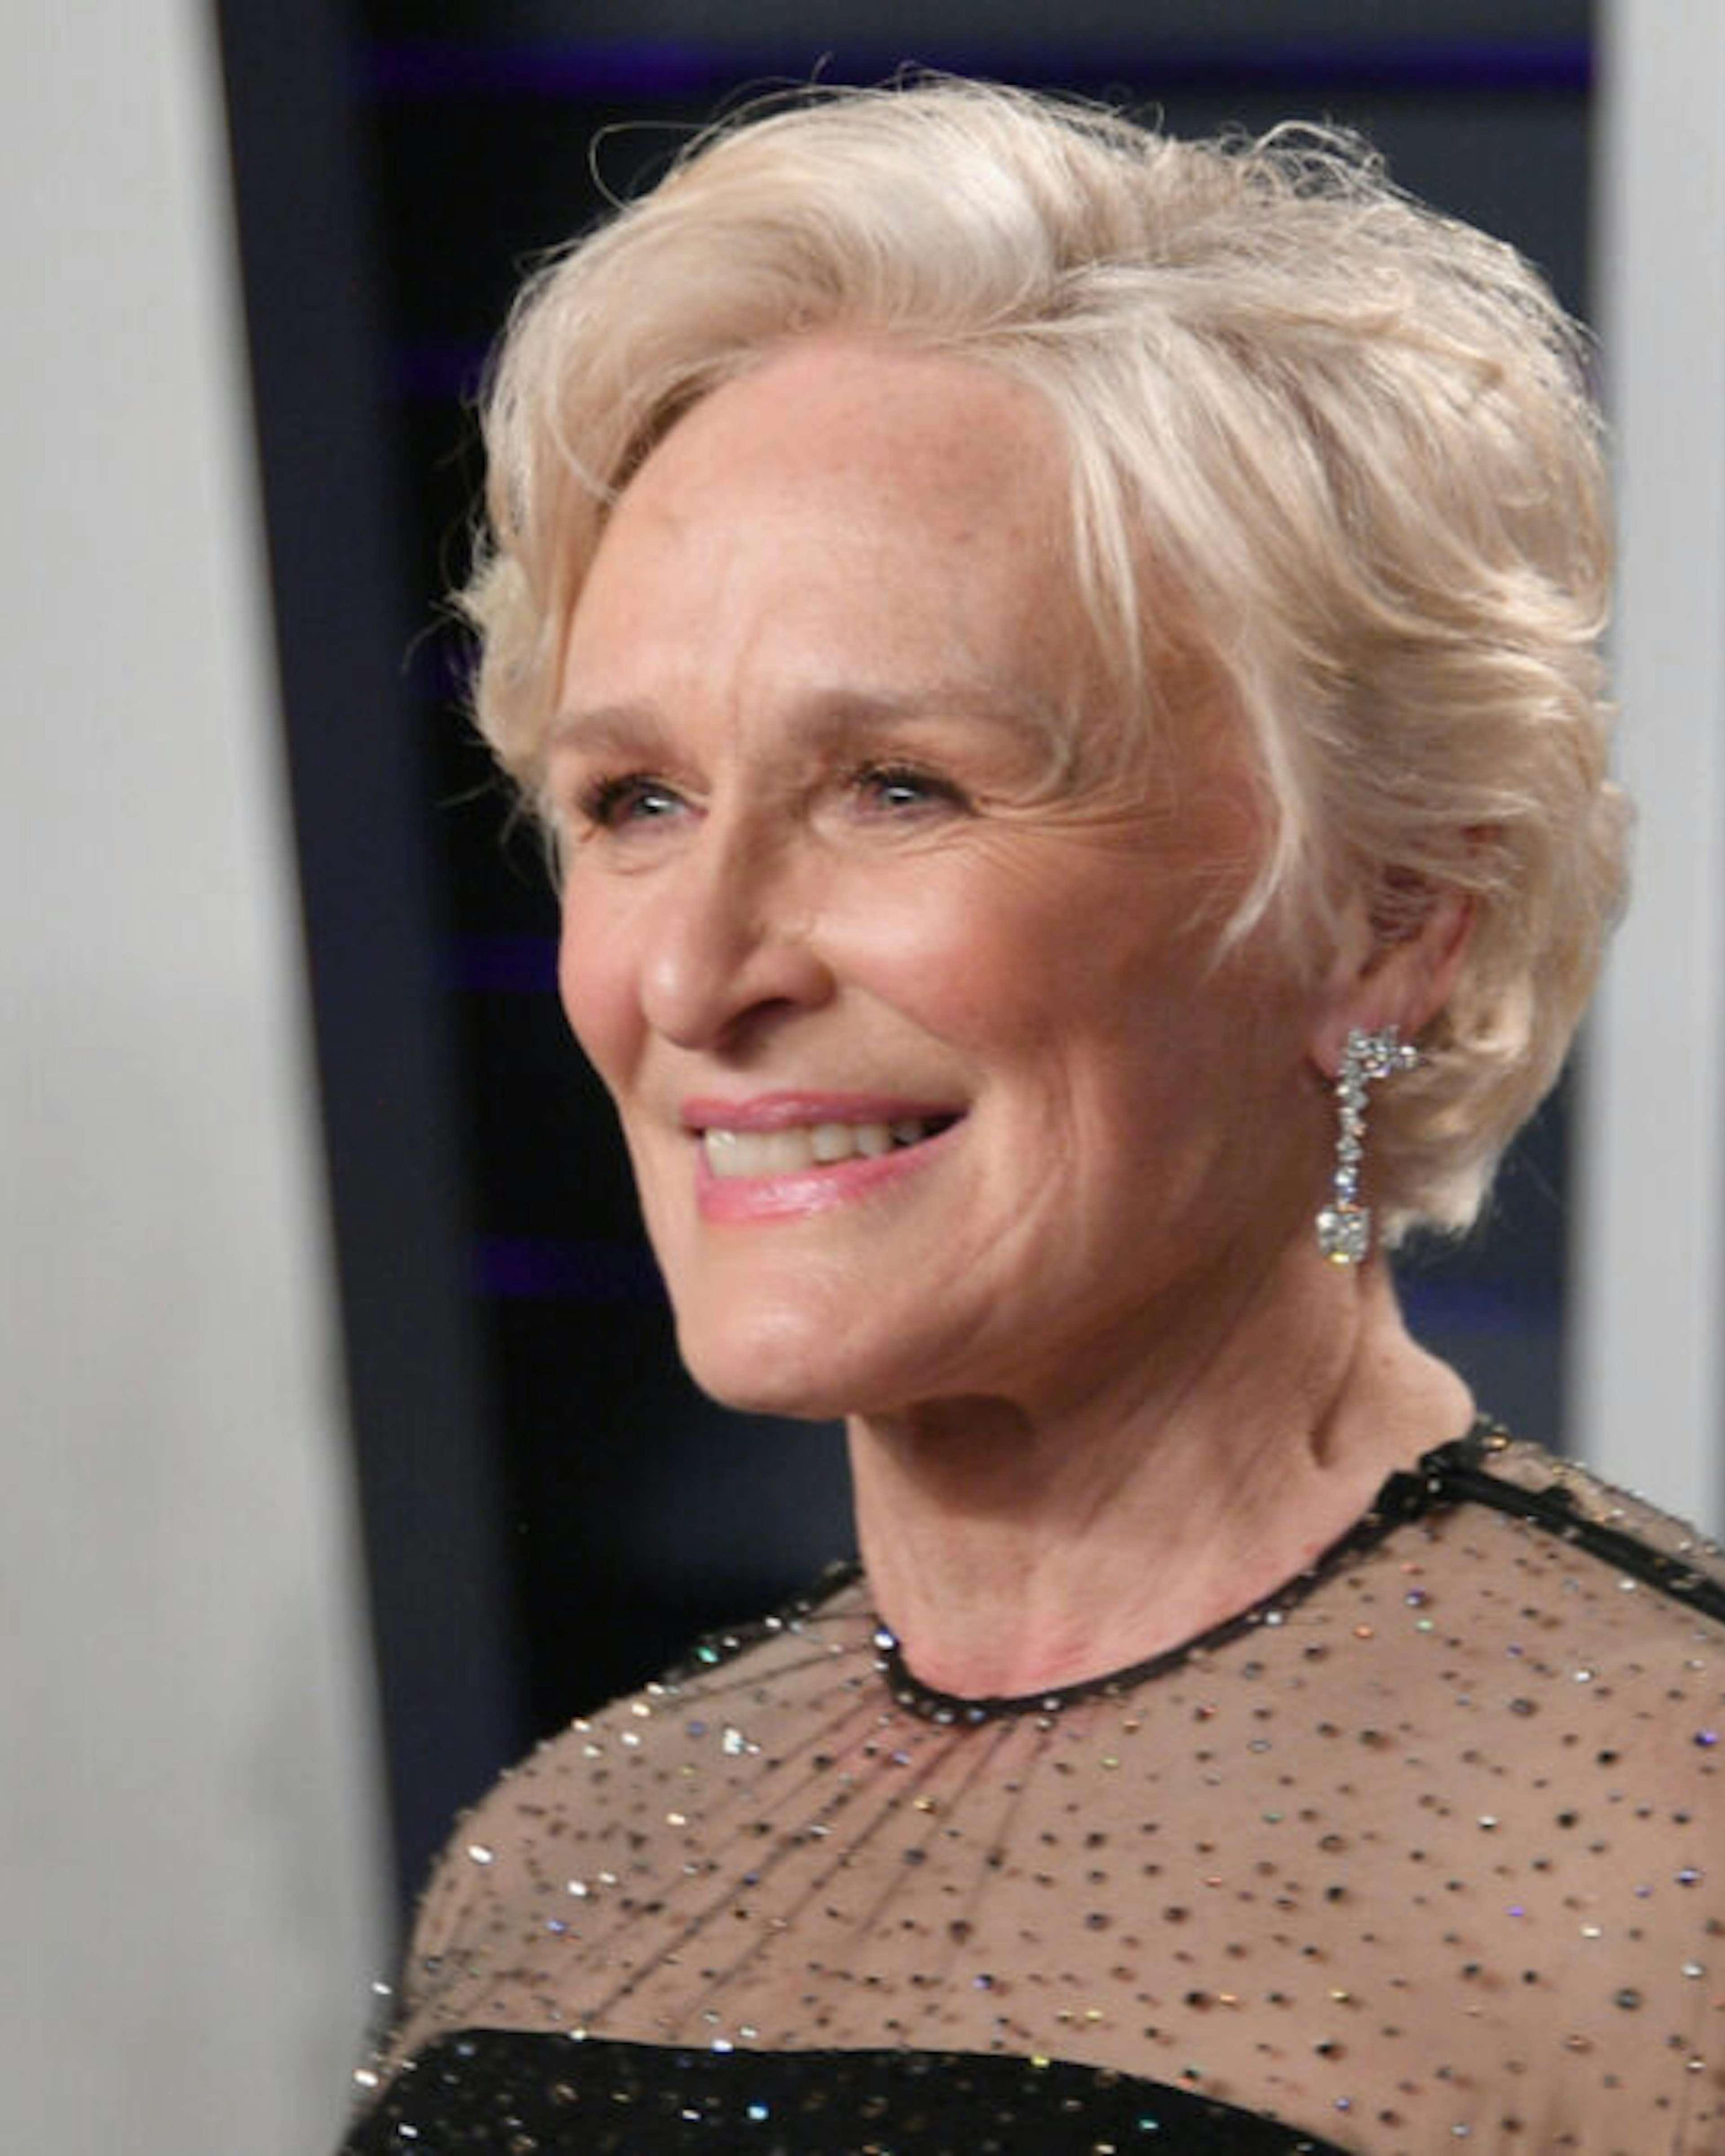 Glenn Close attends the 2019 Vanity Fair Oscar Party hosted by Radhika Jones at Wallis Annenberg Center for the Performing Arts on February 24, 2019 in Beverly Hills, California.